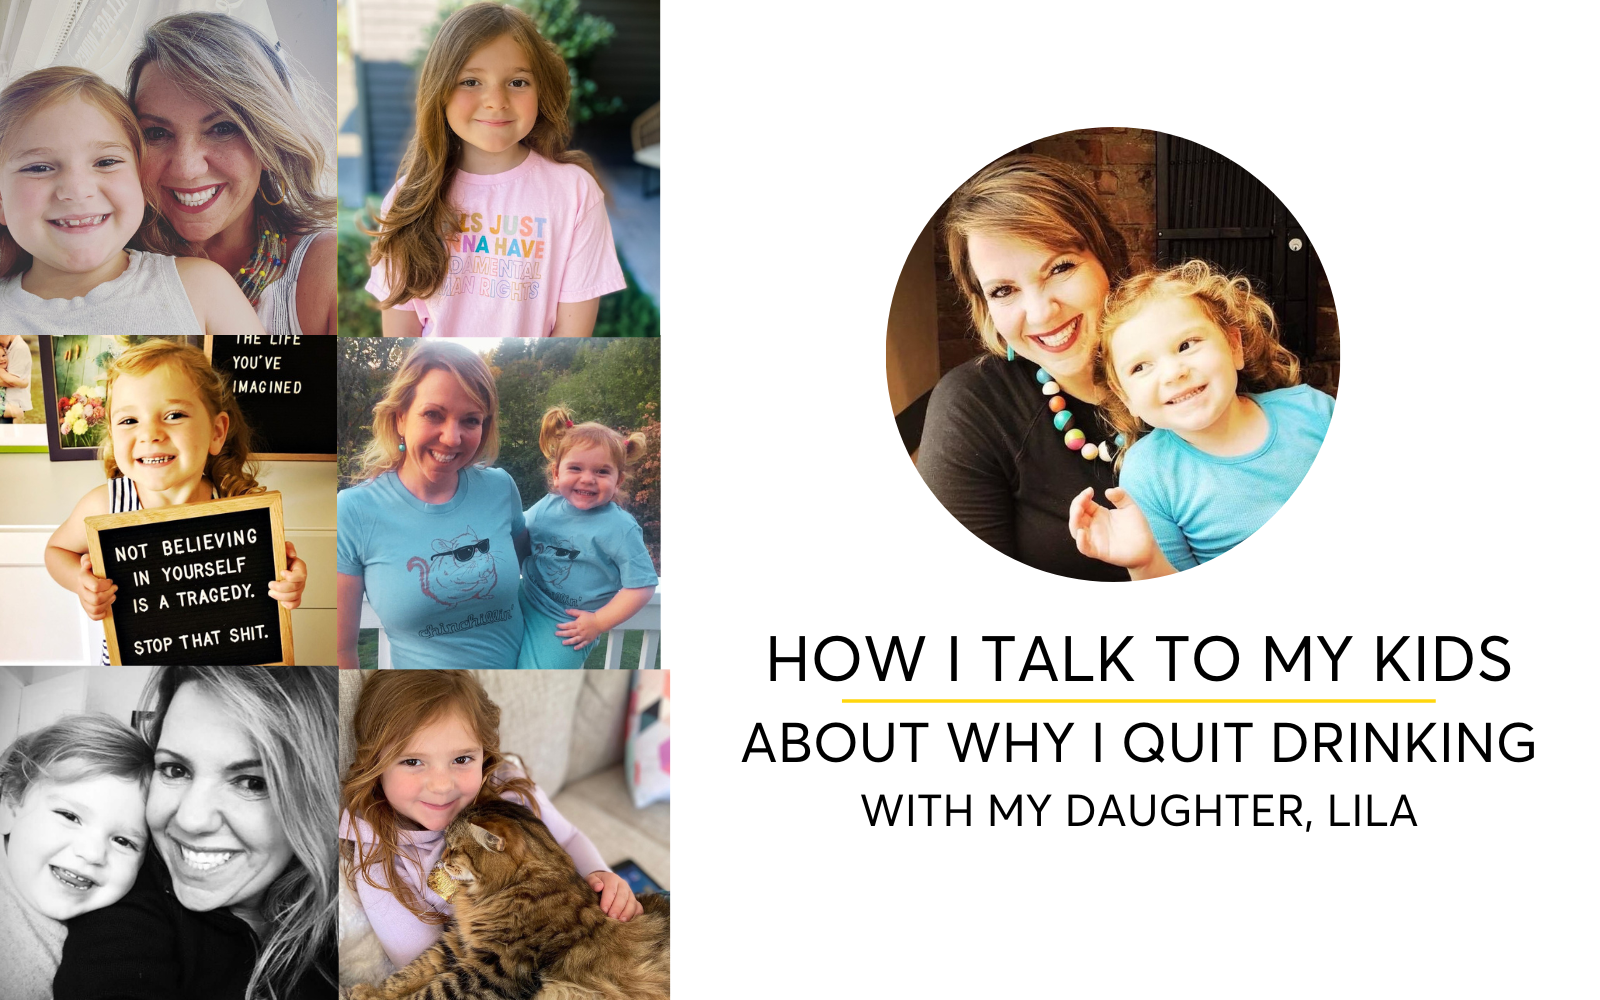 What My Kids Know About Why I Quit Drinking